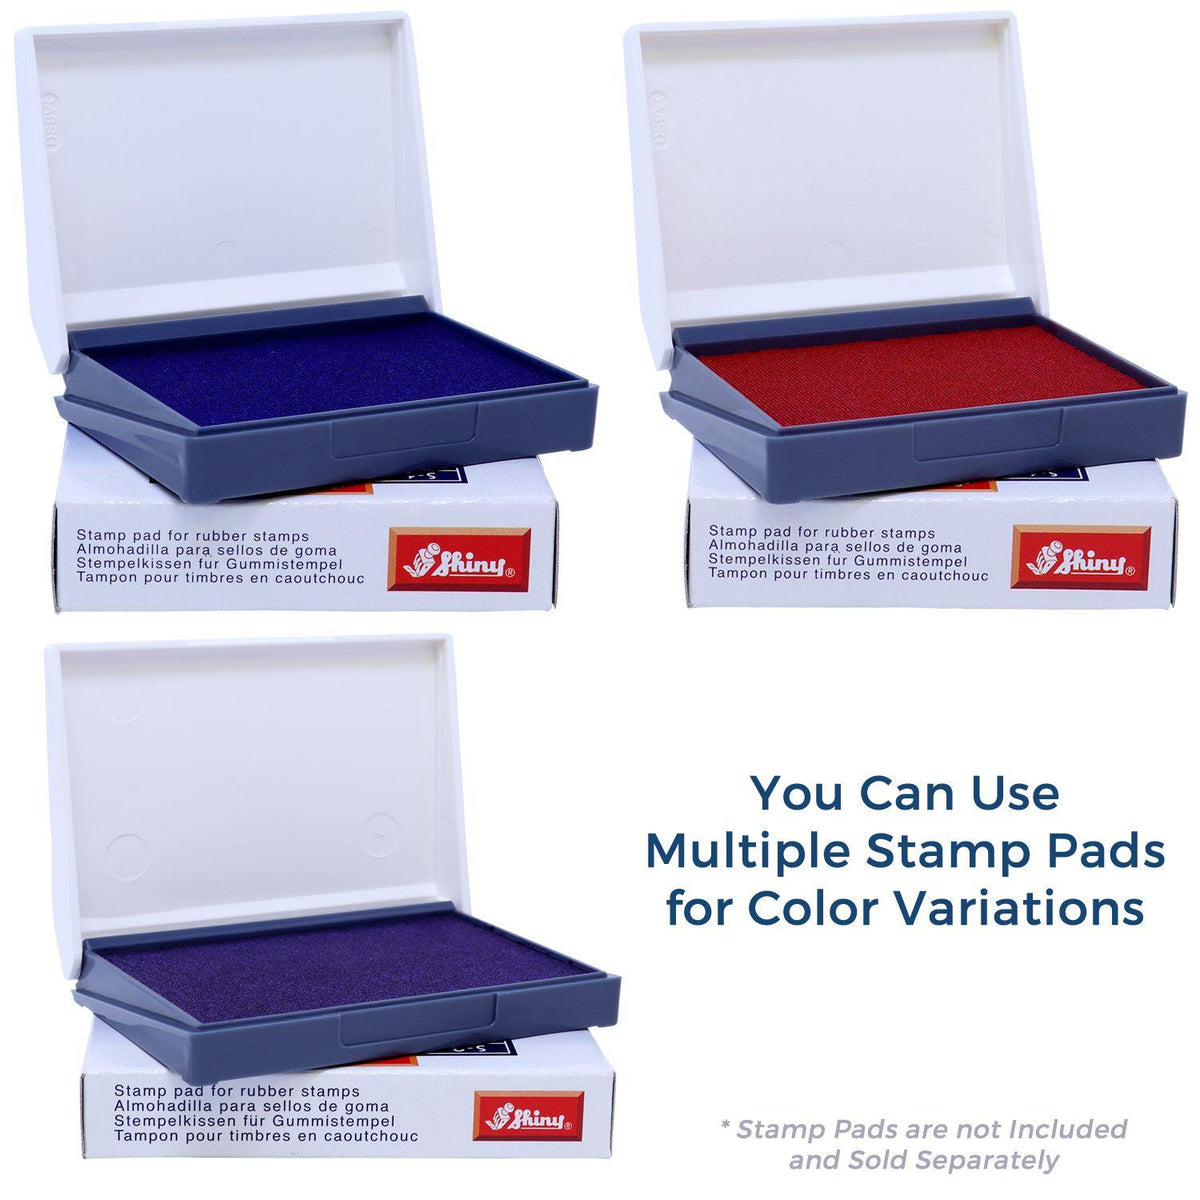 Stamp Pads for Standard Mail Rubber Stamp Available